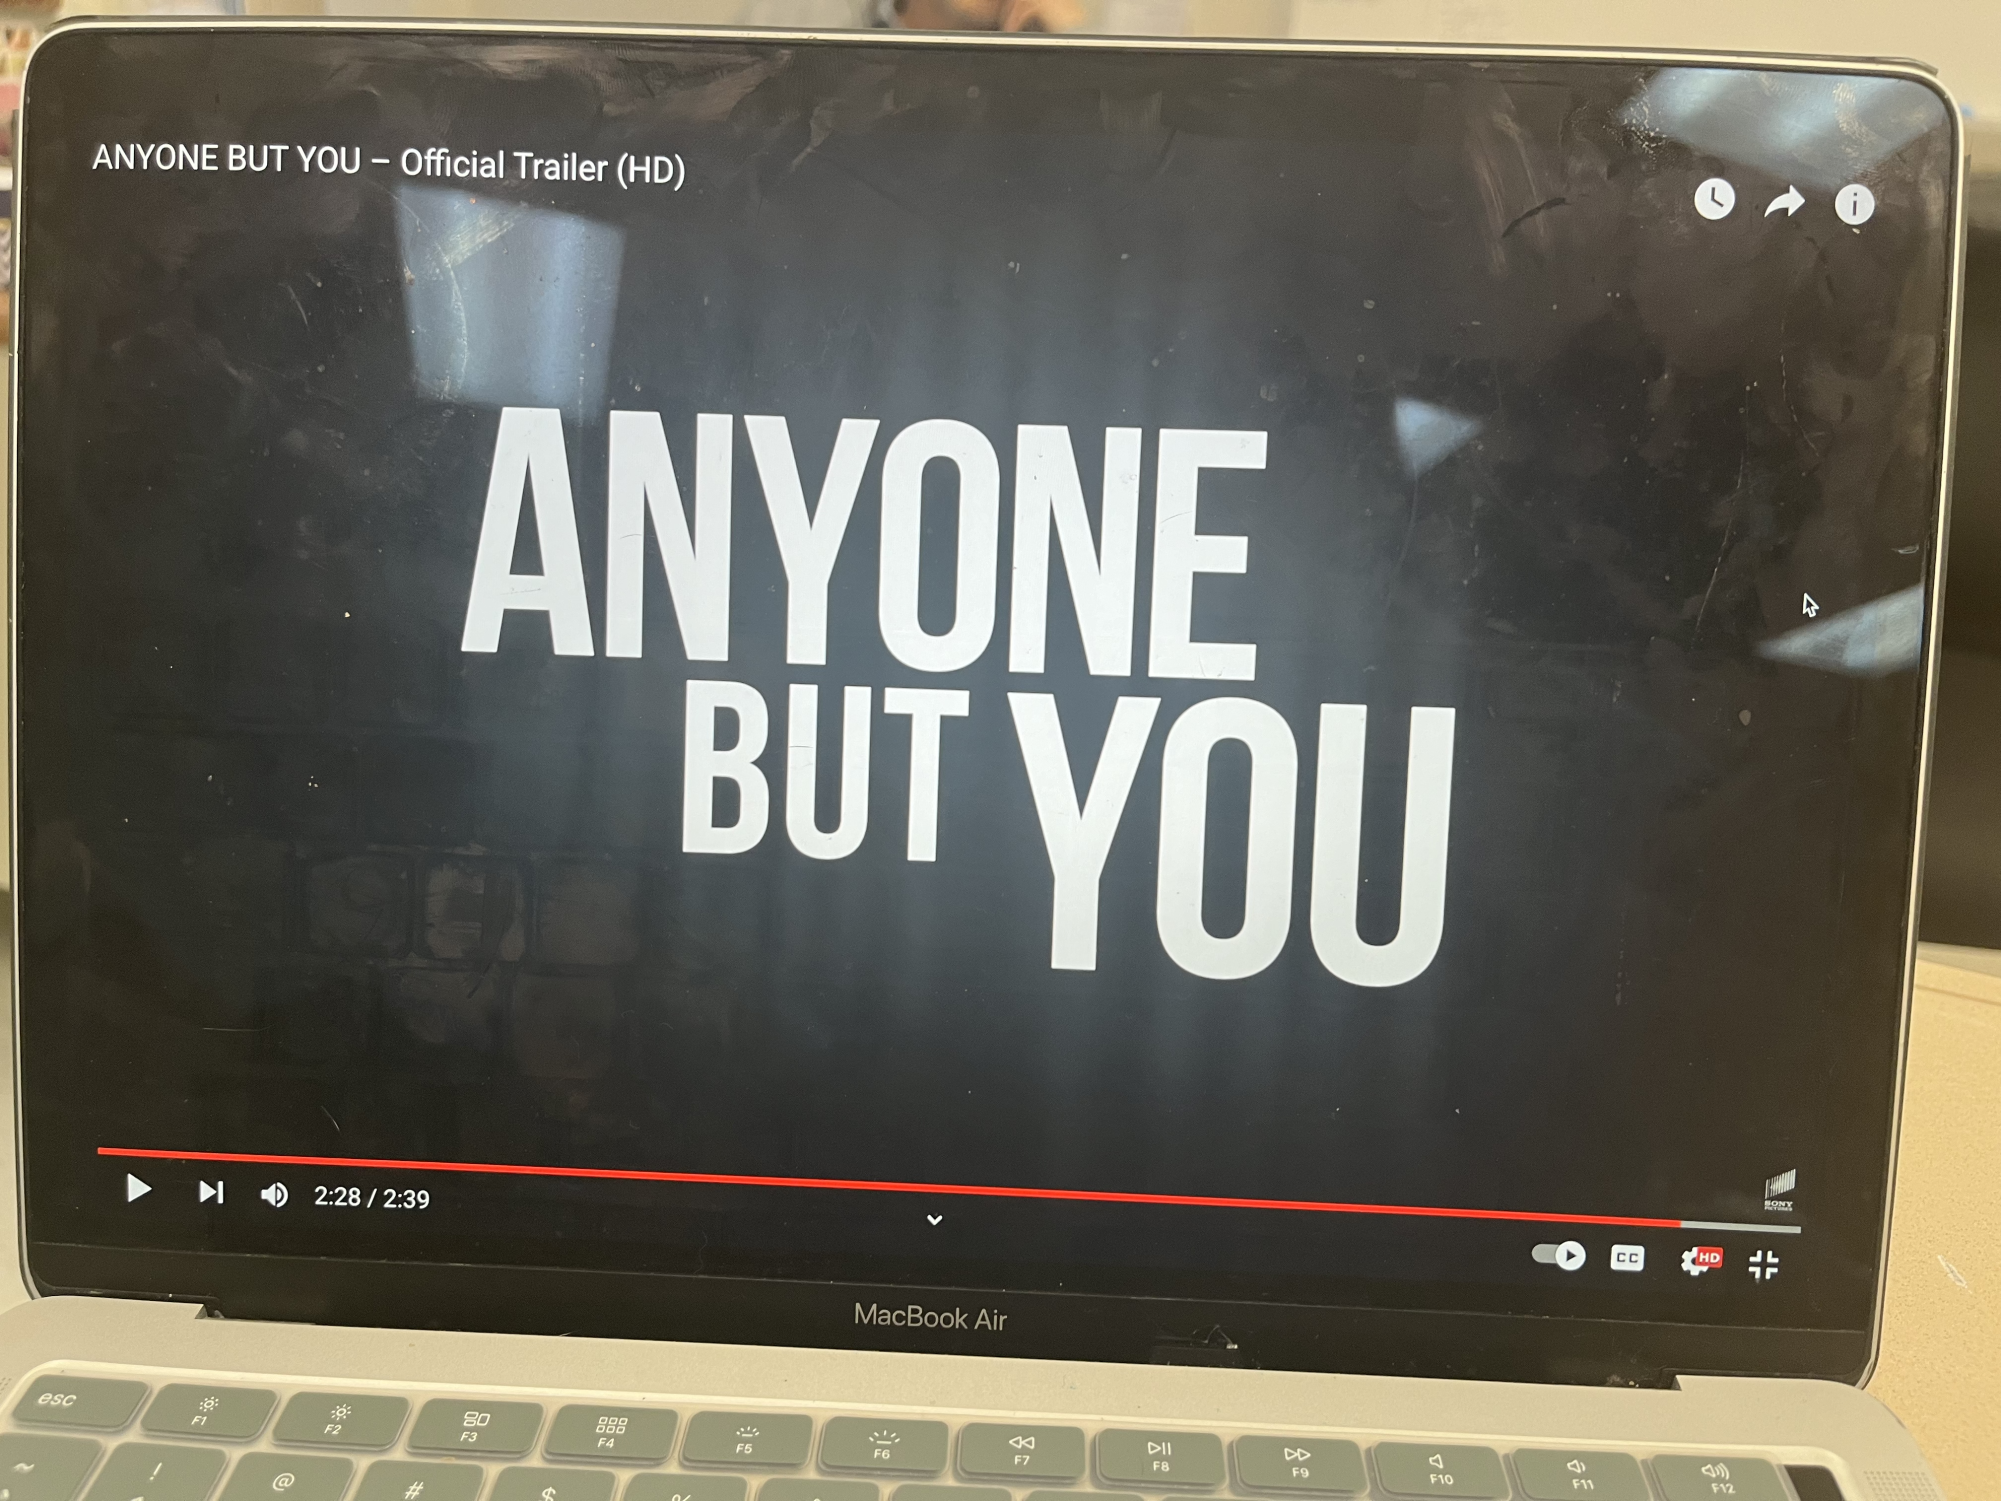 Title card for Anyone But You as shown in the trailer